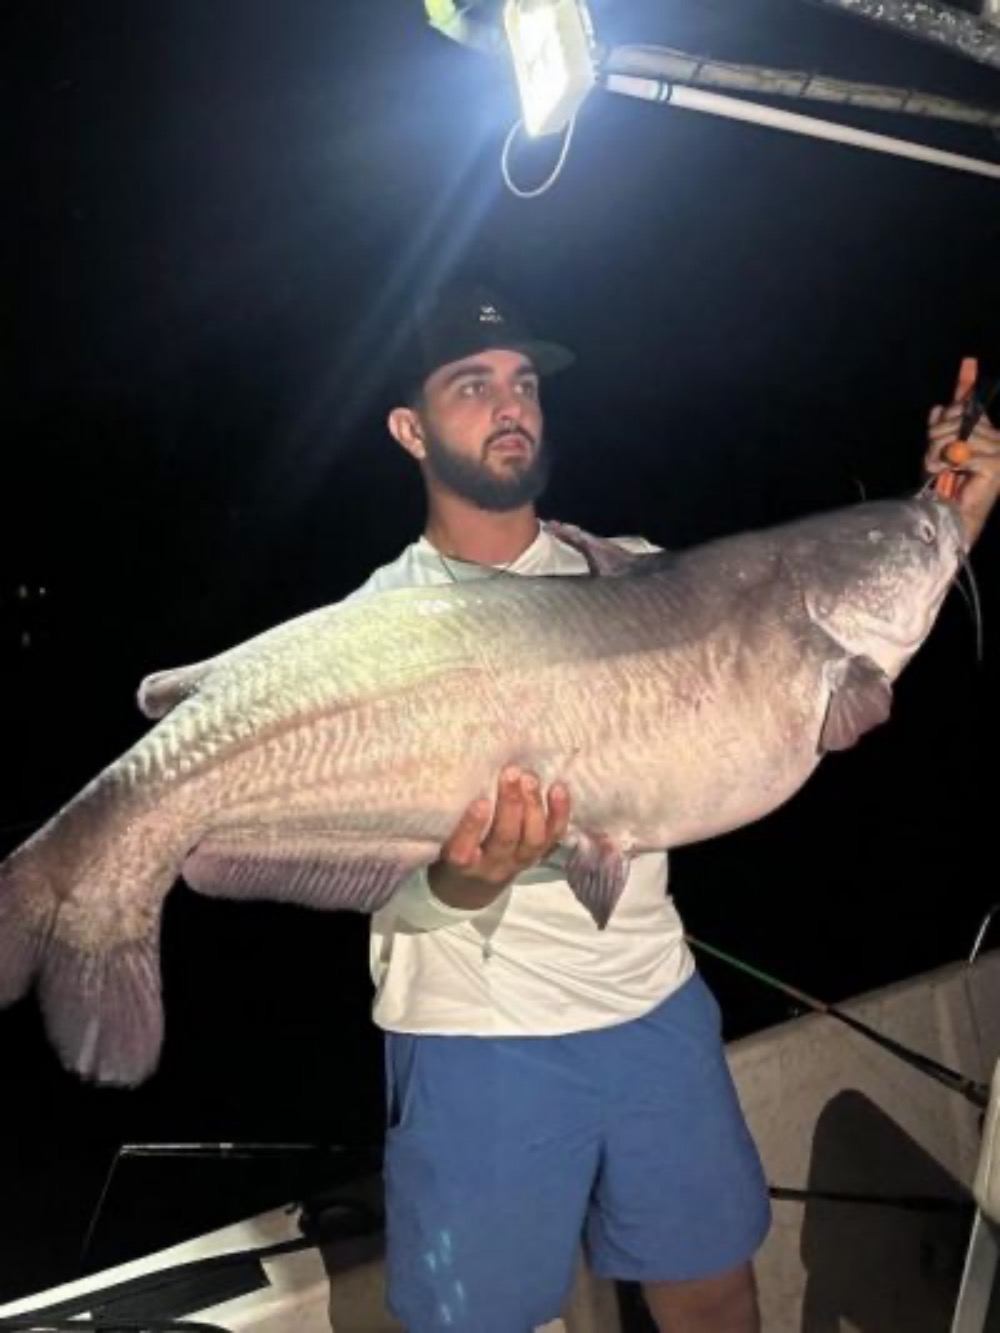 new Delaware State fishing record for Blue Catfish